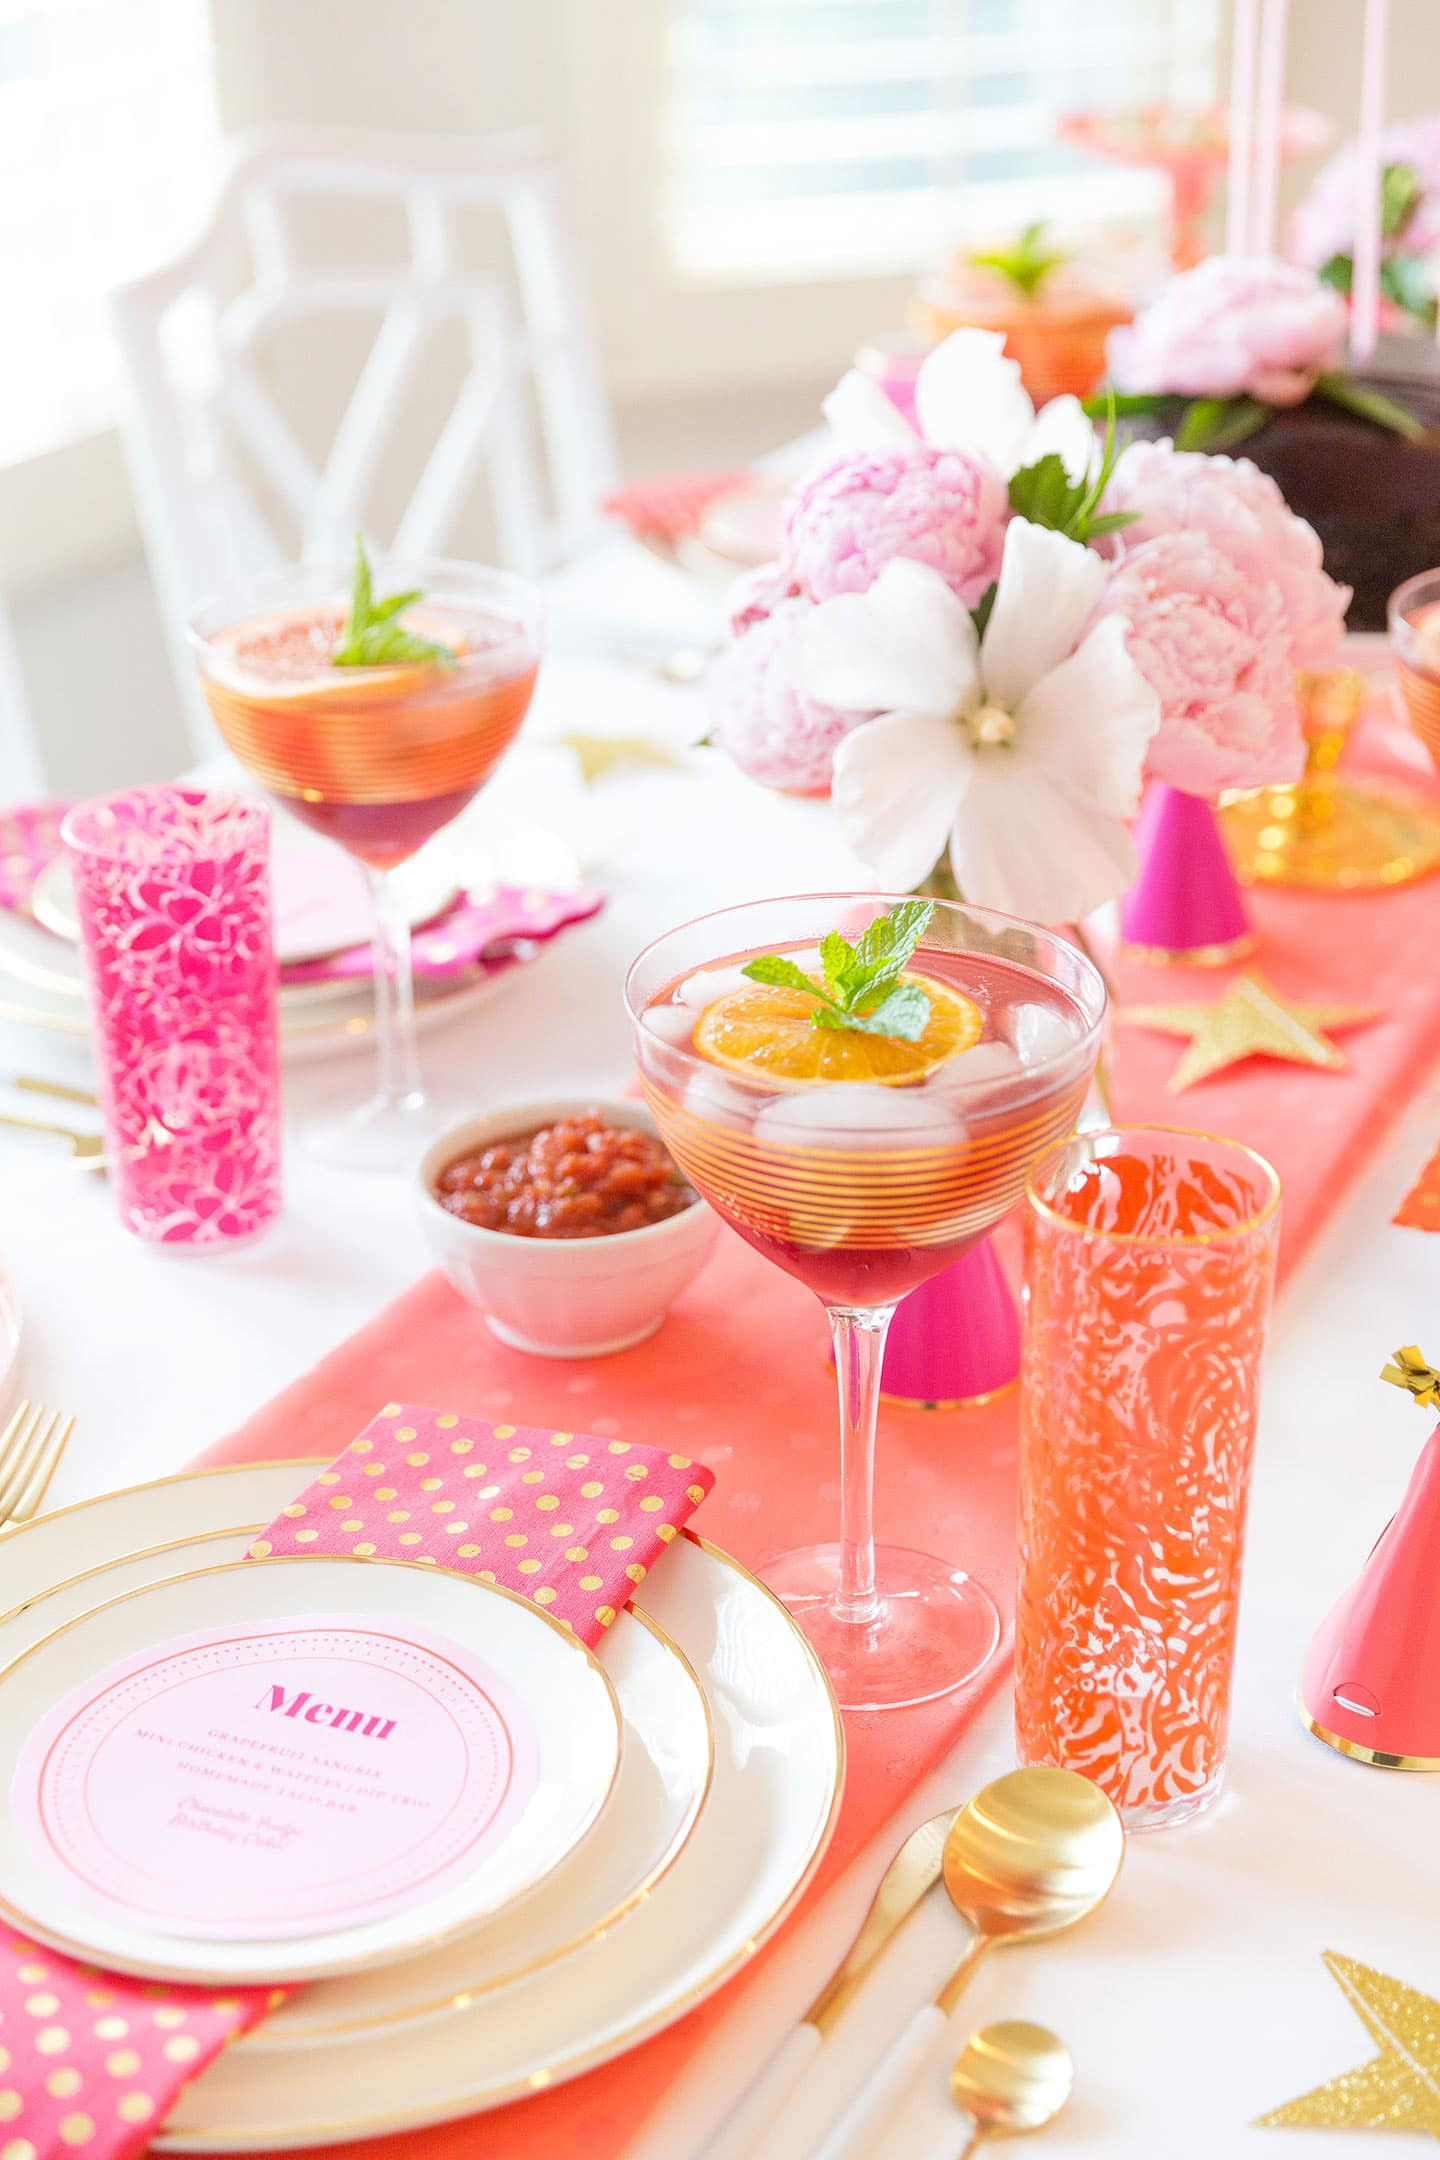 Party Themed Ideas For Adults
 Creative Adult Birthday Party Ideas for the Girls